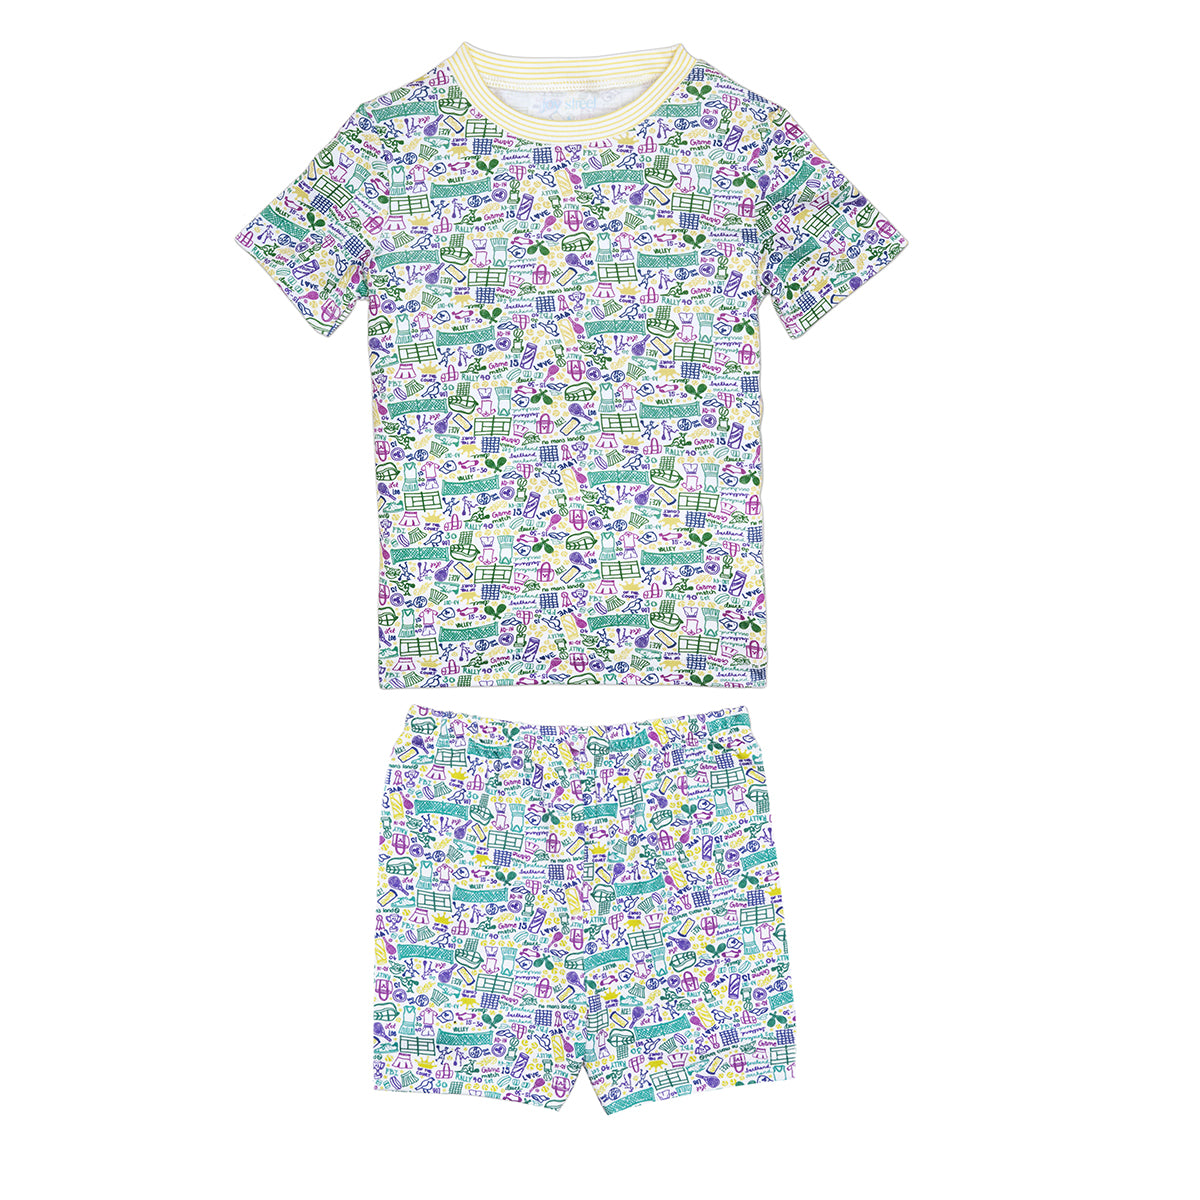 flat laying shirt and pants pajama set. Pajamas have hand drawn tennis pattern with tennis balls, net and racquet in green yellow and purple.